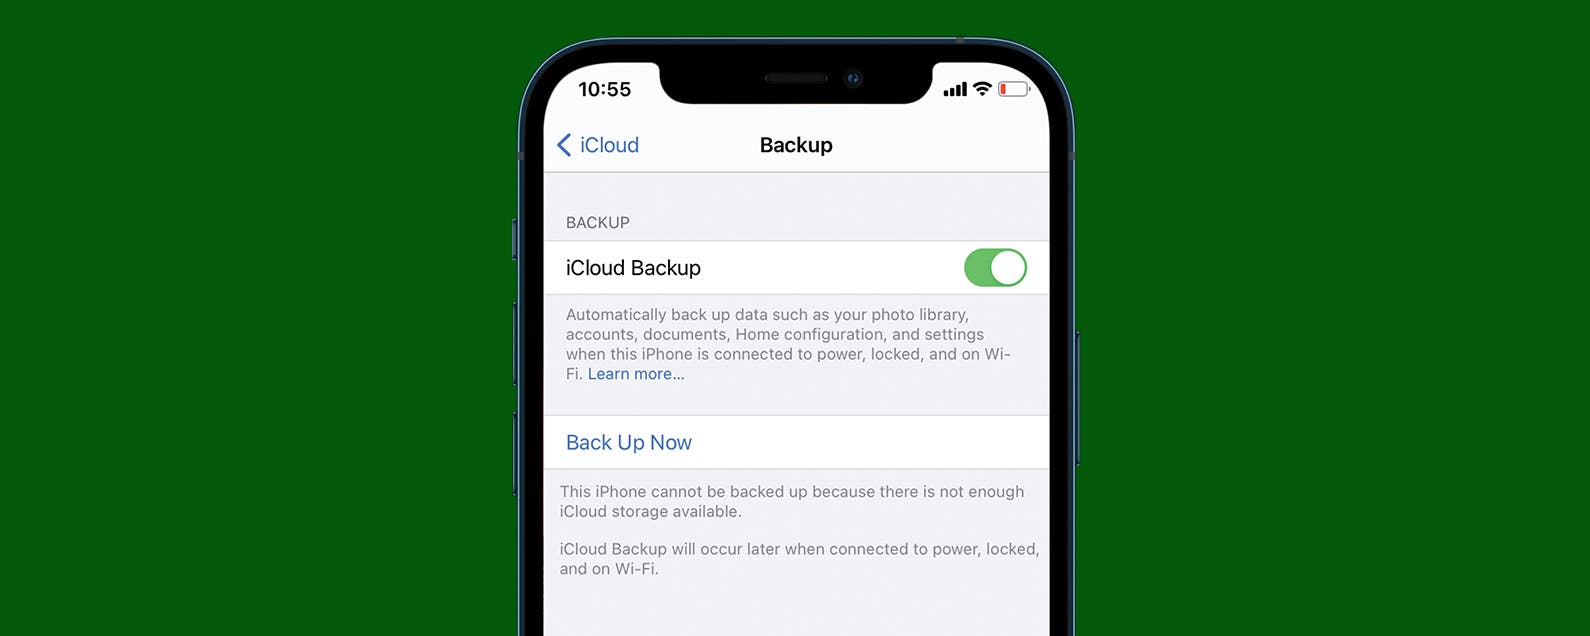 How to Back Up iPhone to iCloud